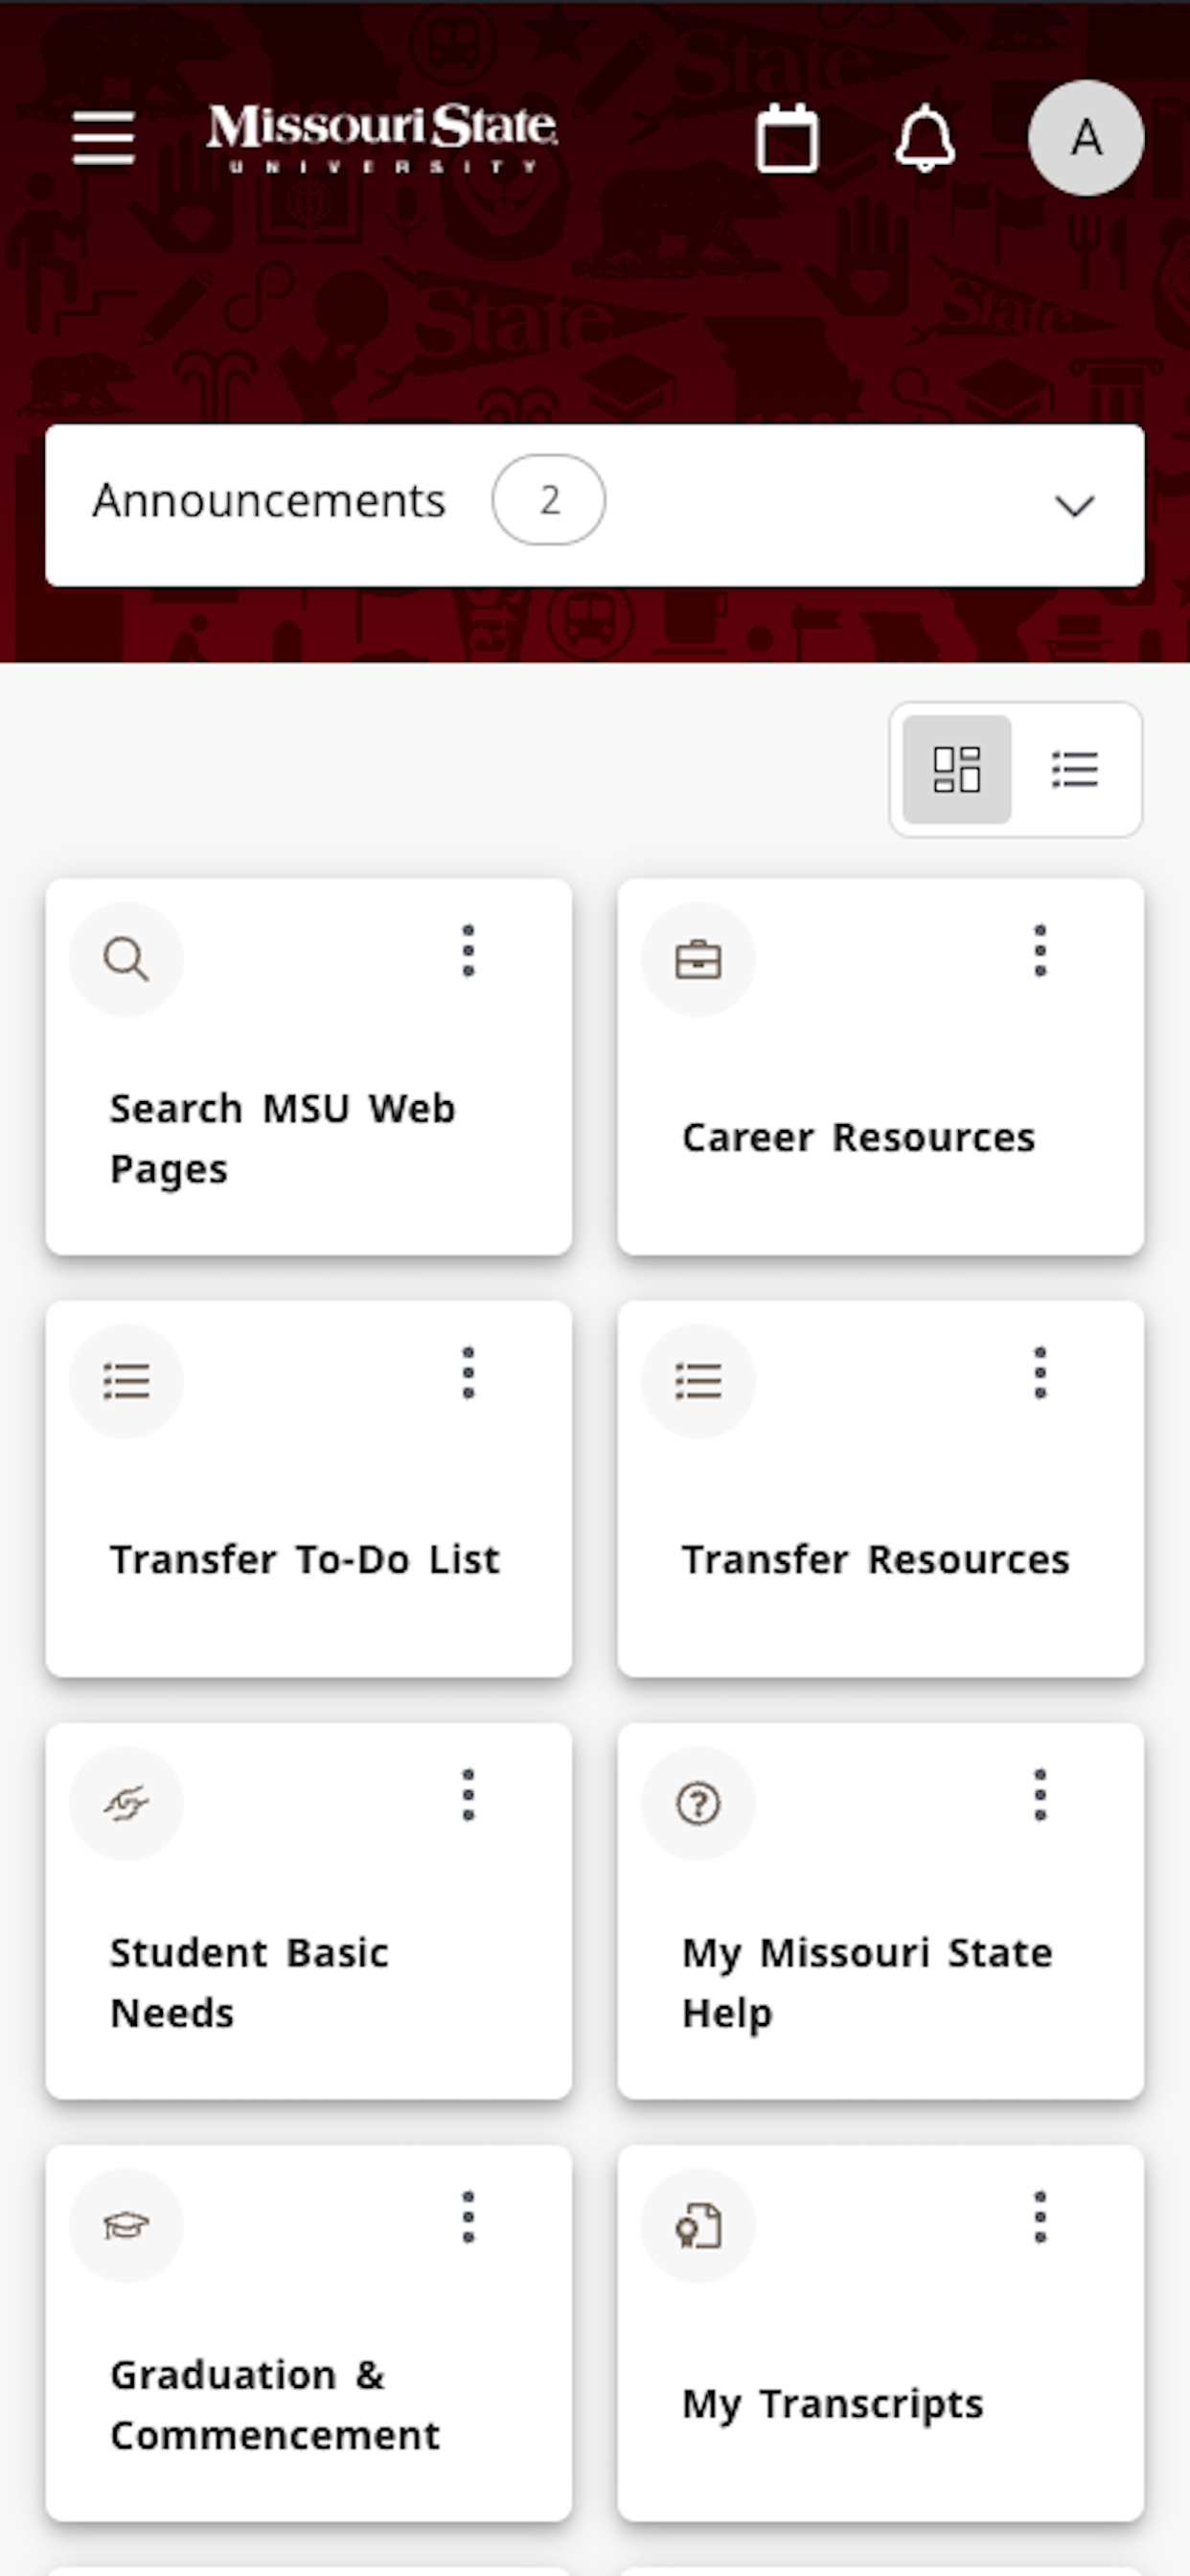 The Home page dashboard in MSU Mobile